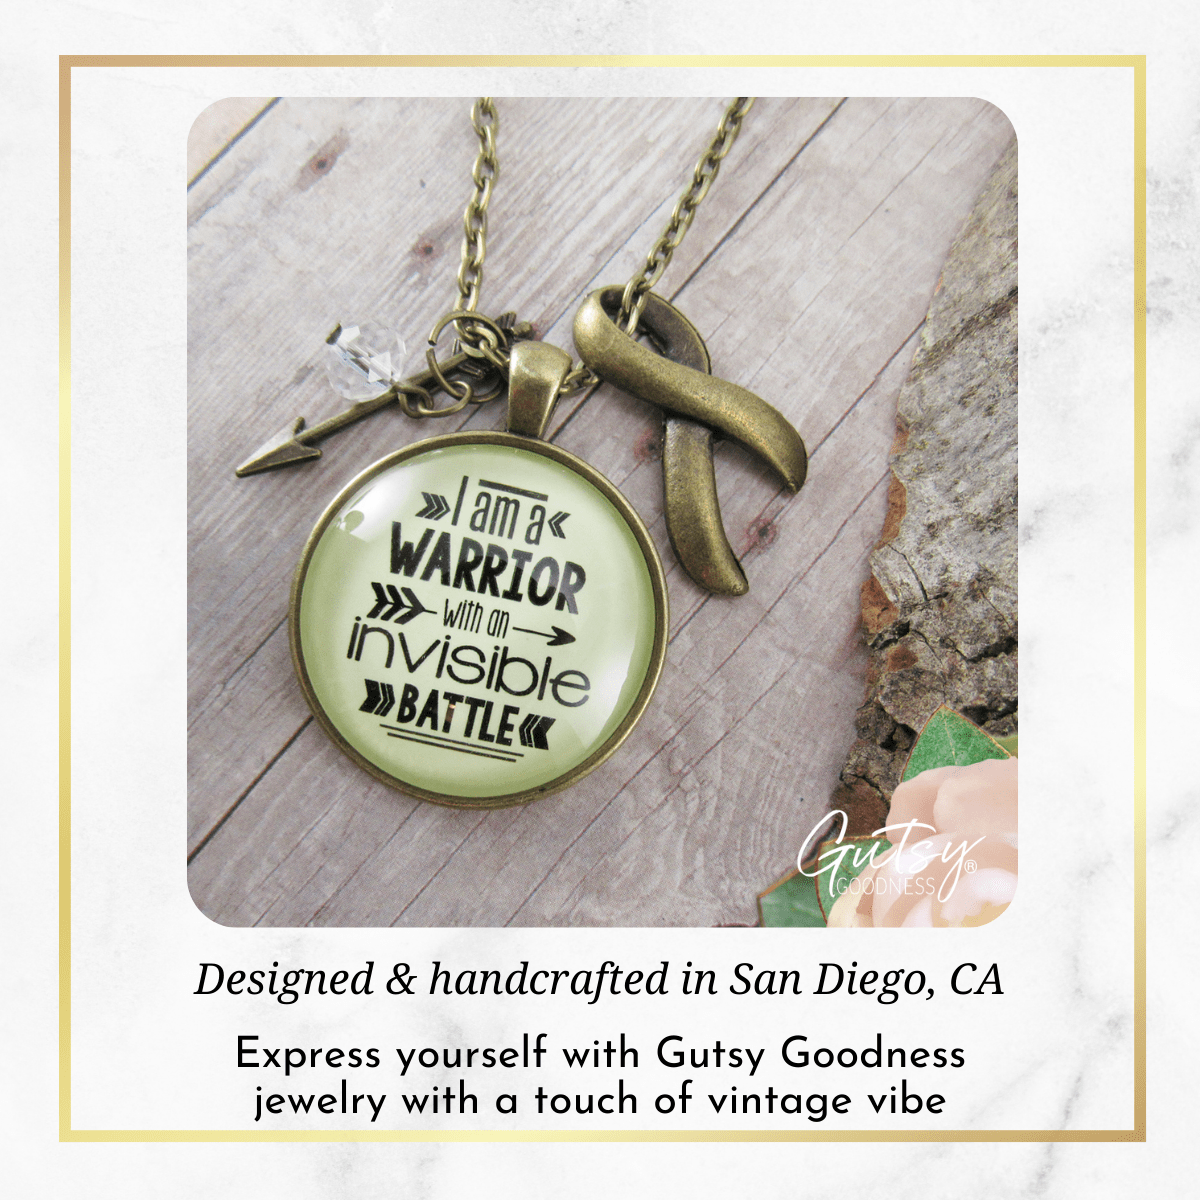 Gutsy Goodness I am a Warrior Invisible Battle Necklace Strong Women Quote Charm - Gutsy Goodness Handmade Jewelry;I Am A Warrior Invisible Battle Necklace Strong Women Quote Charm - Gutsy Goodness Handmade Jewelry Gifts